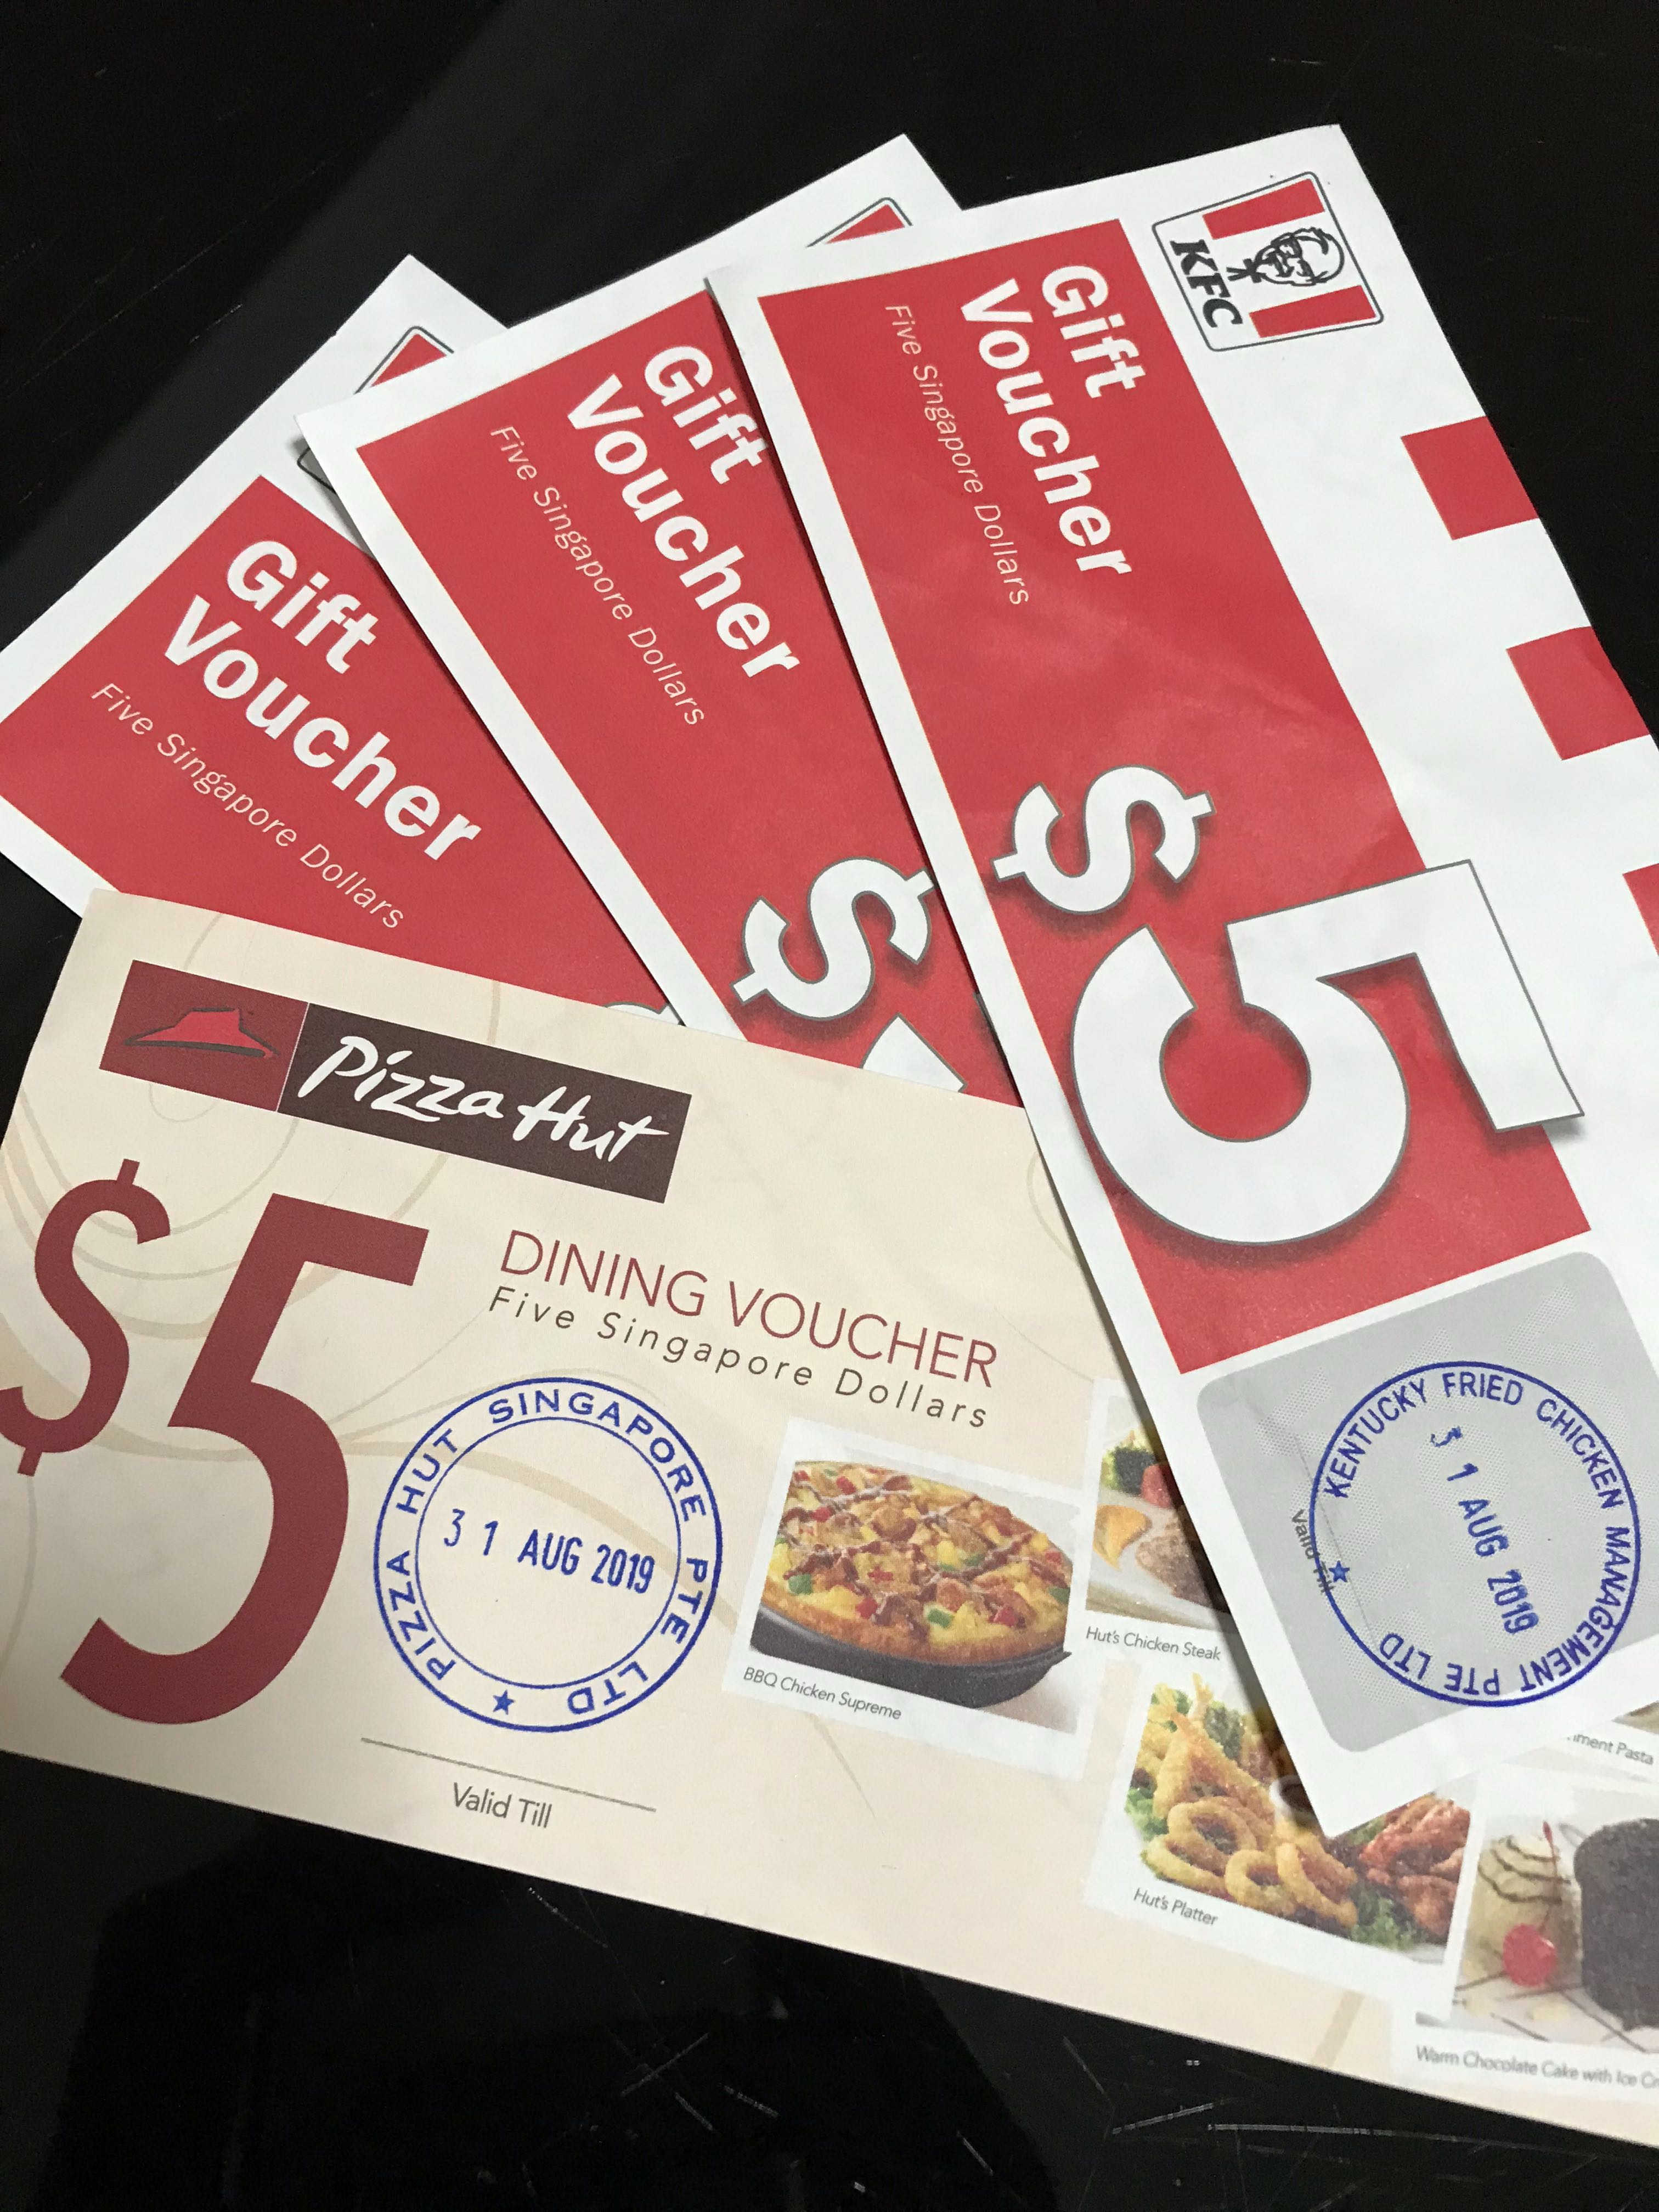 15 Kfc Voucher Get Pizza Hut Free Entertainment Gift Cards Vouchers On Carousell - roblox song id kfc roblox free 7